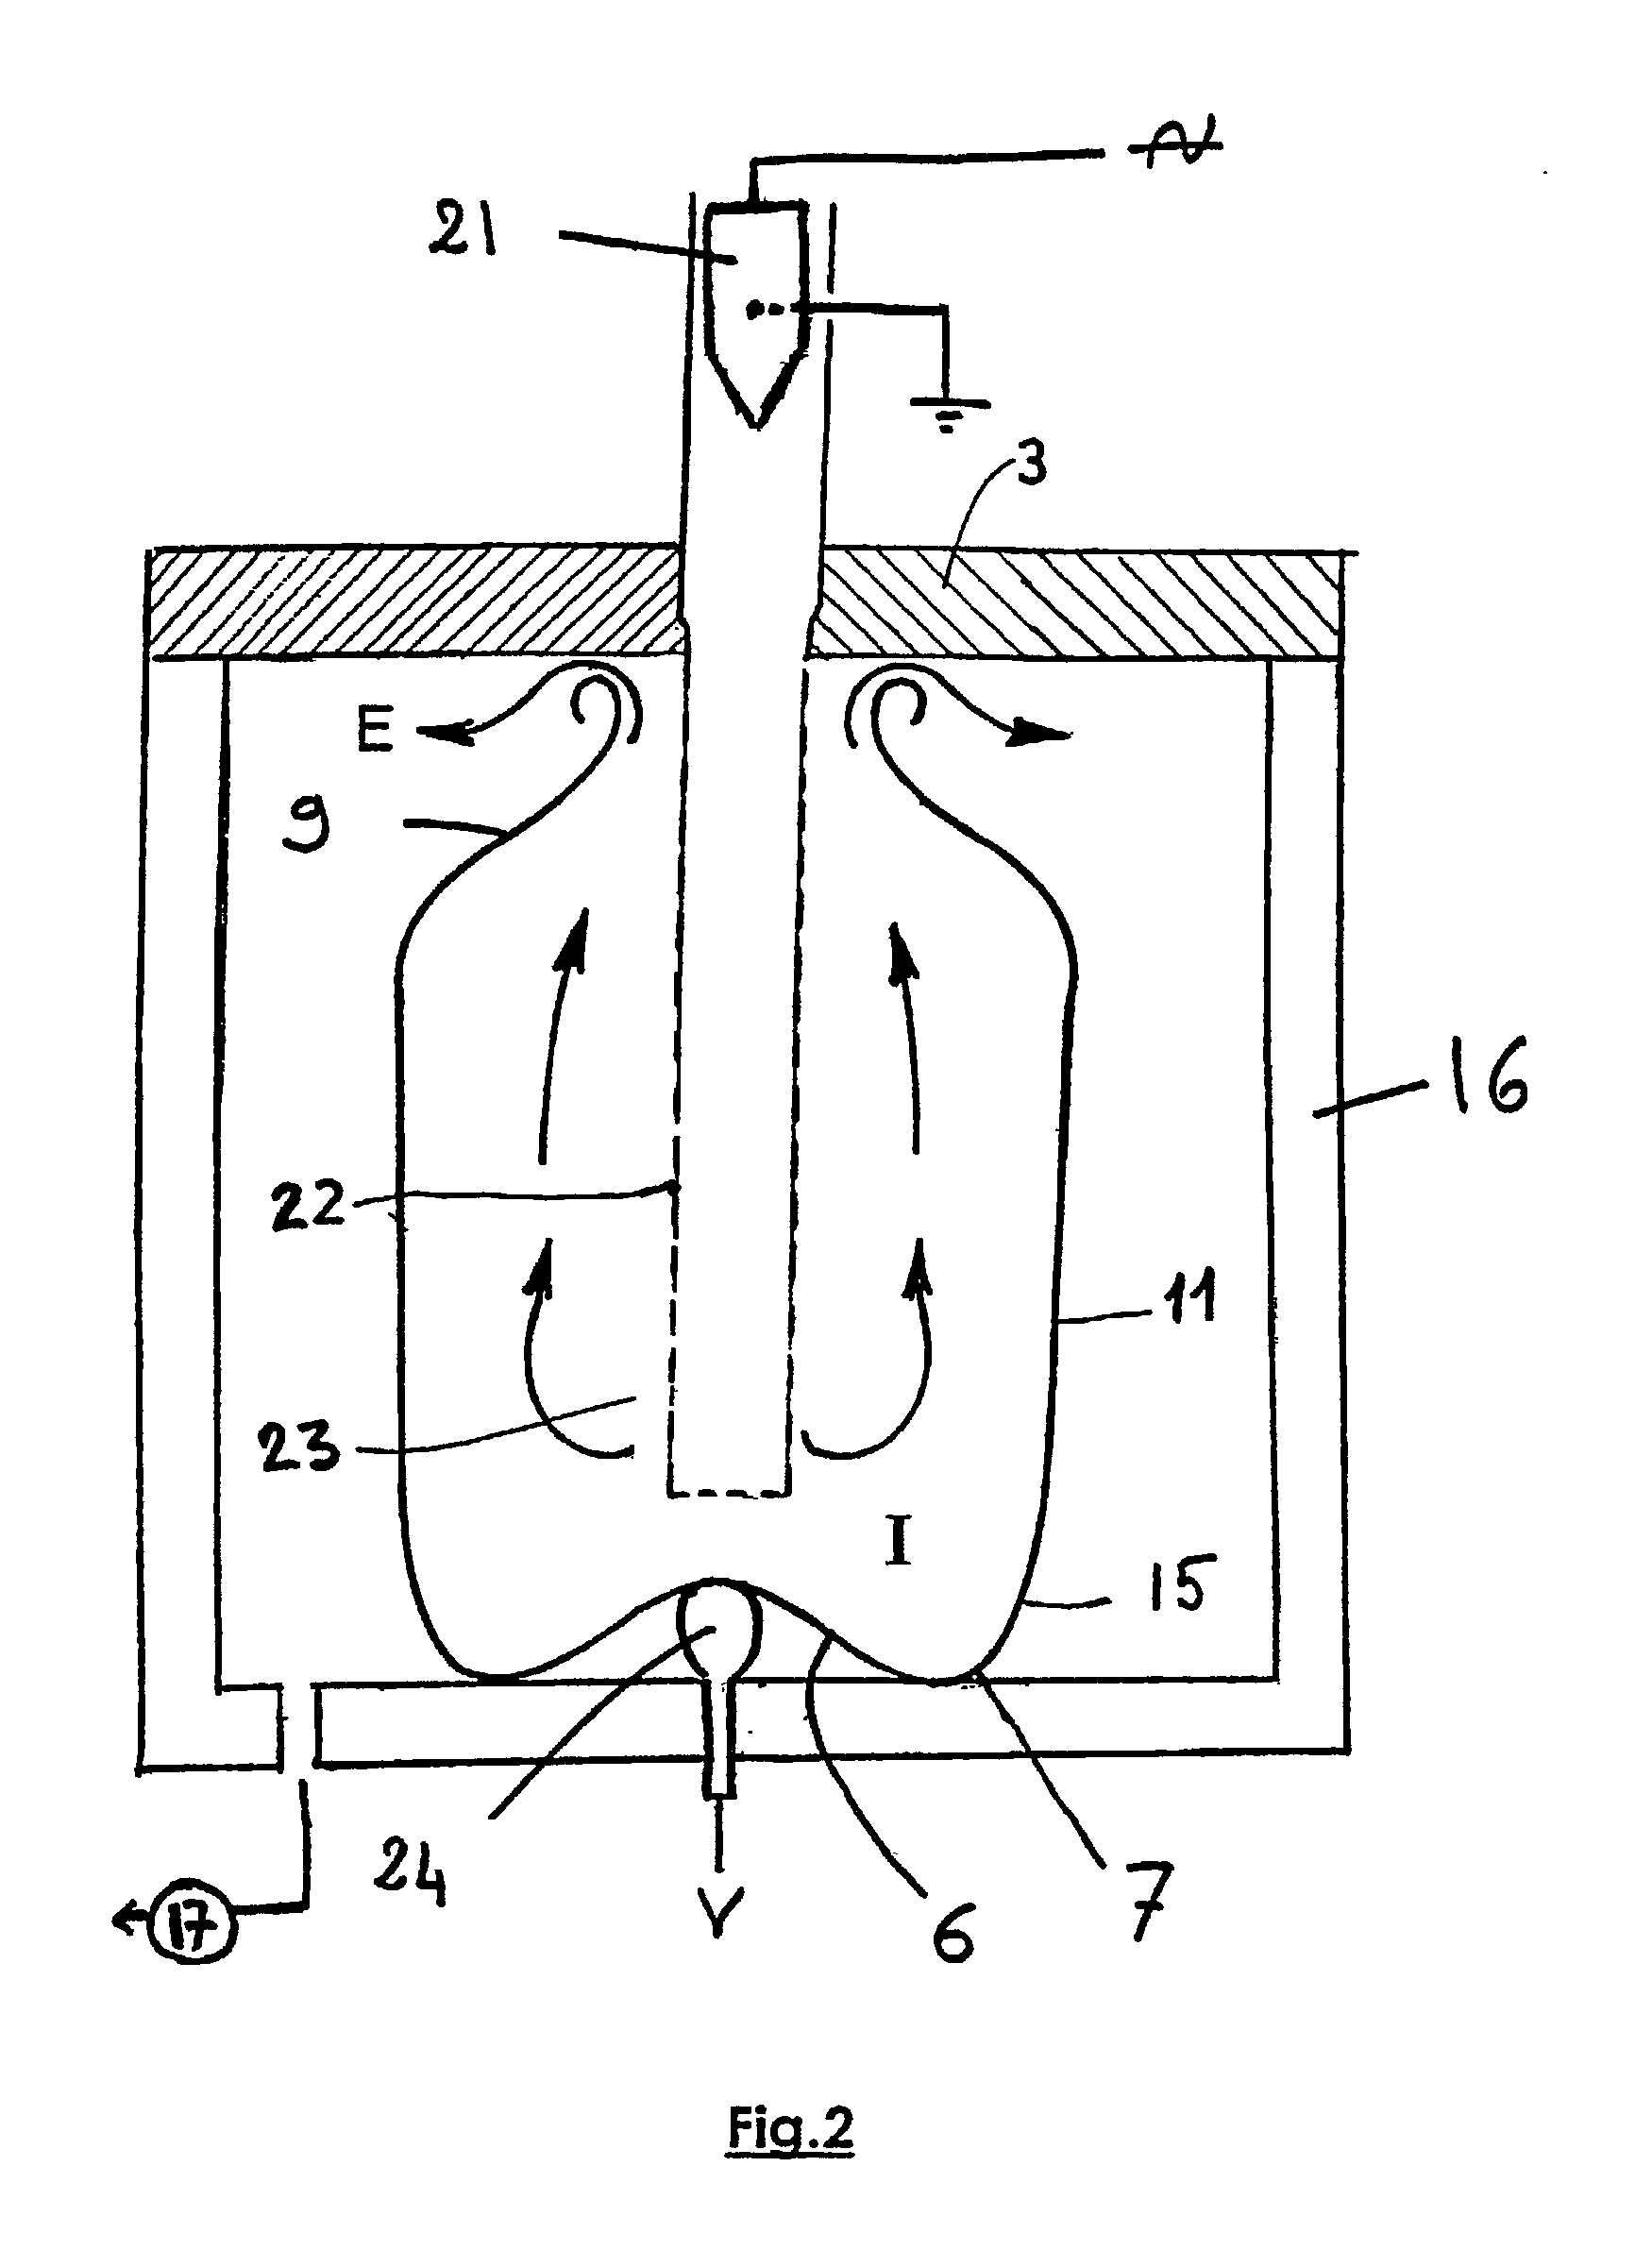 Method for depositing a coating on the wall of metallic containers